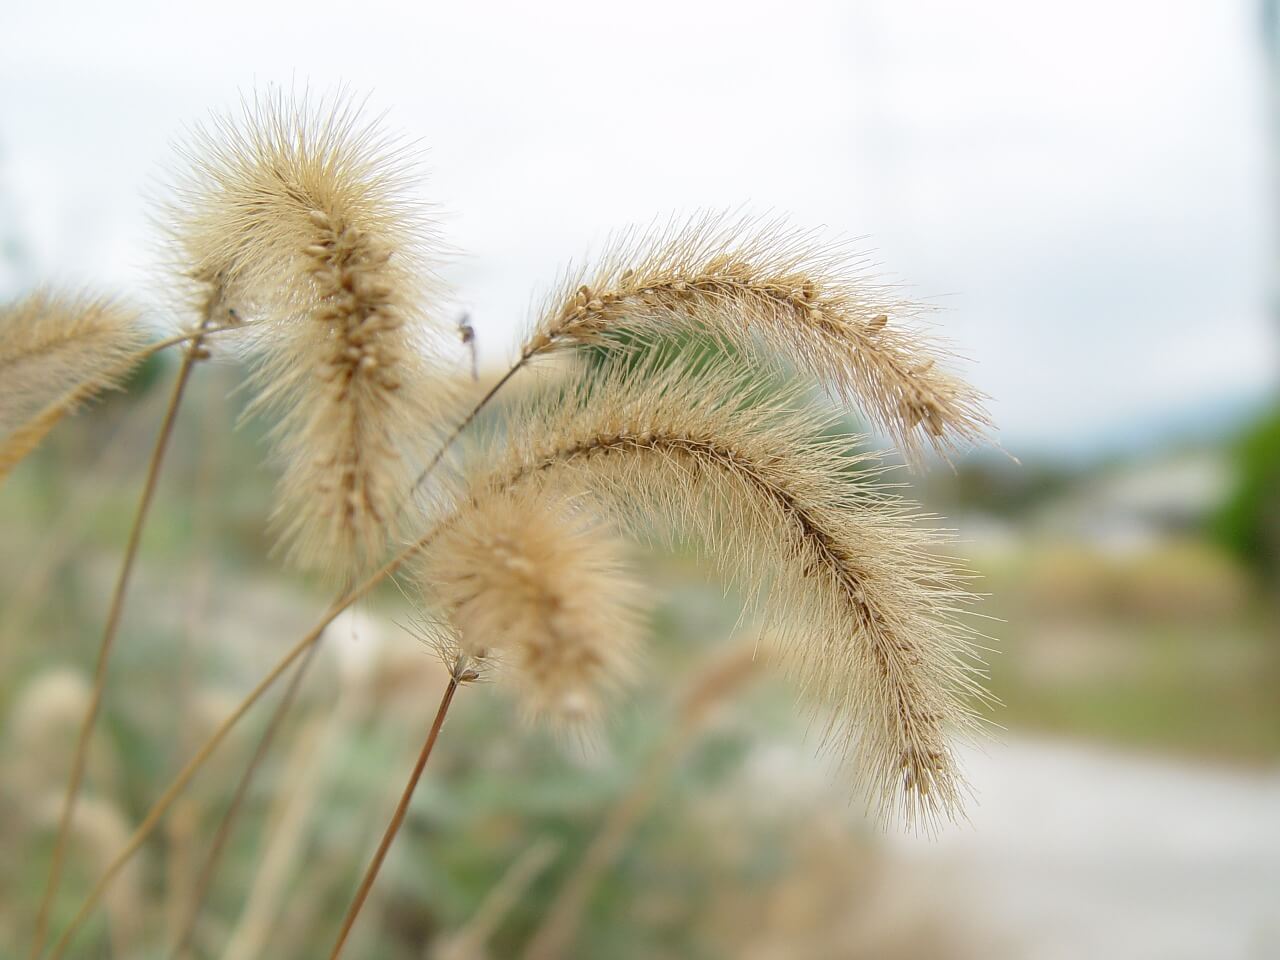 Foxtail plant a threat to dogs, cats and horses